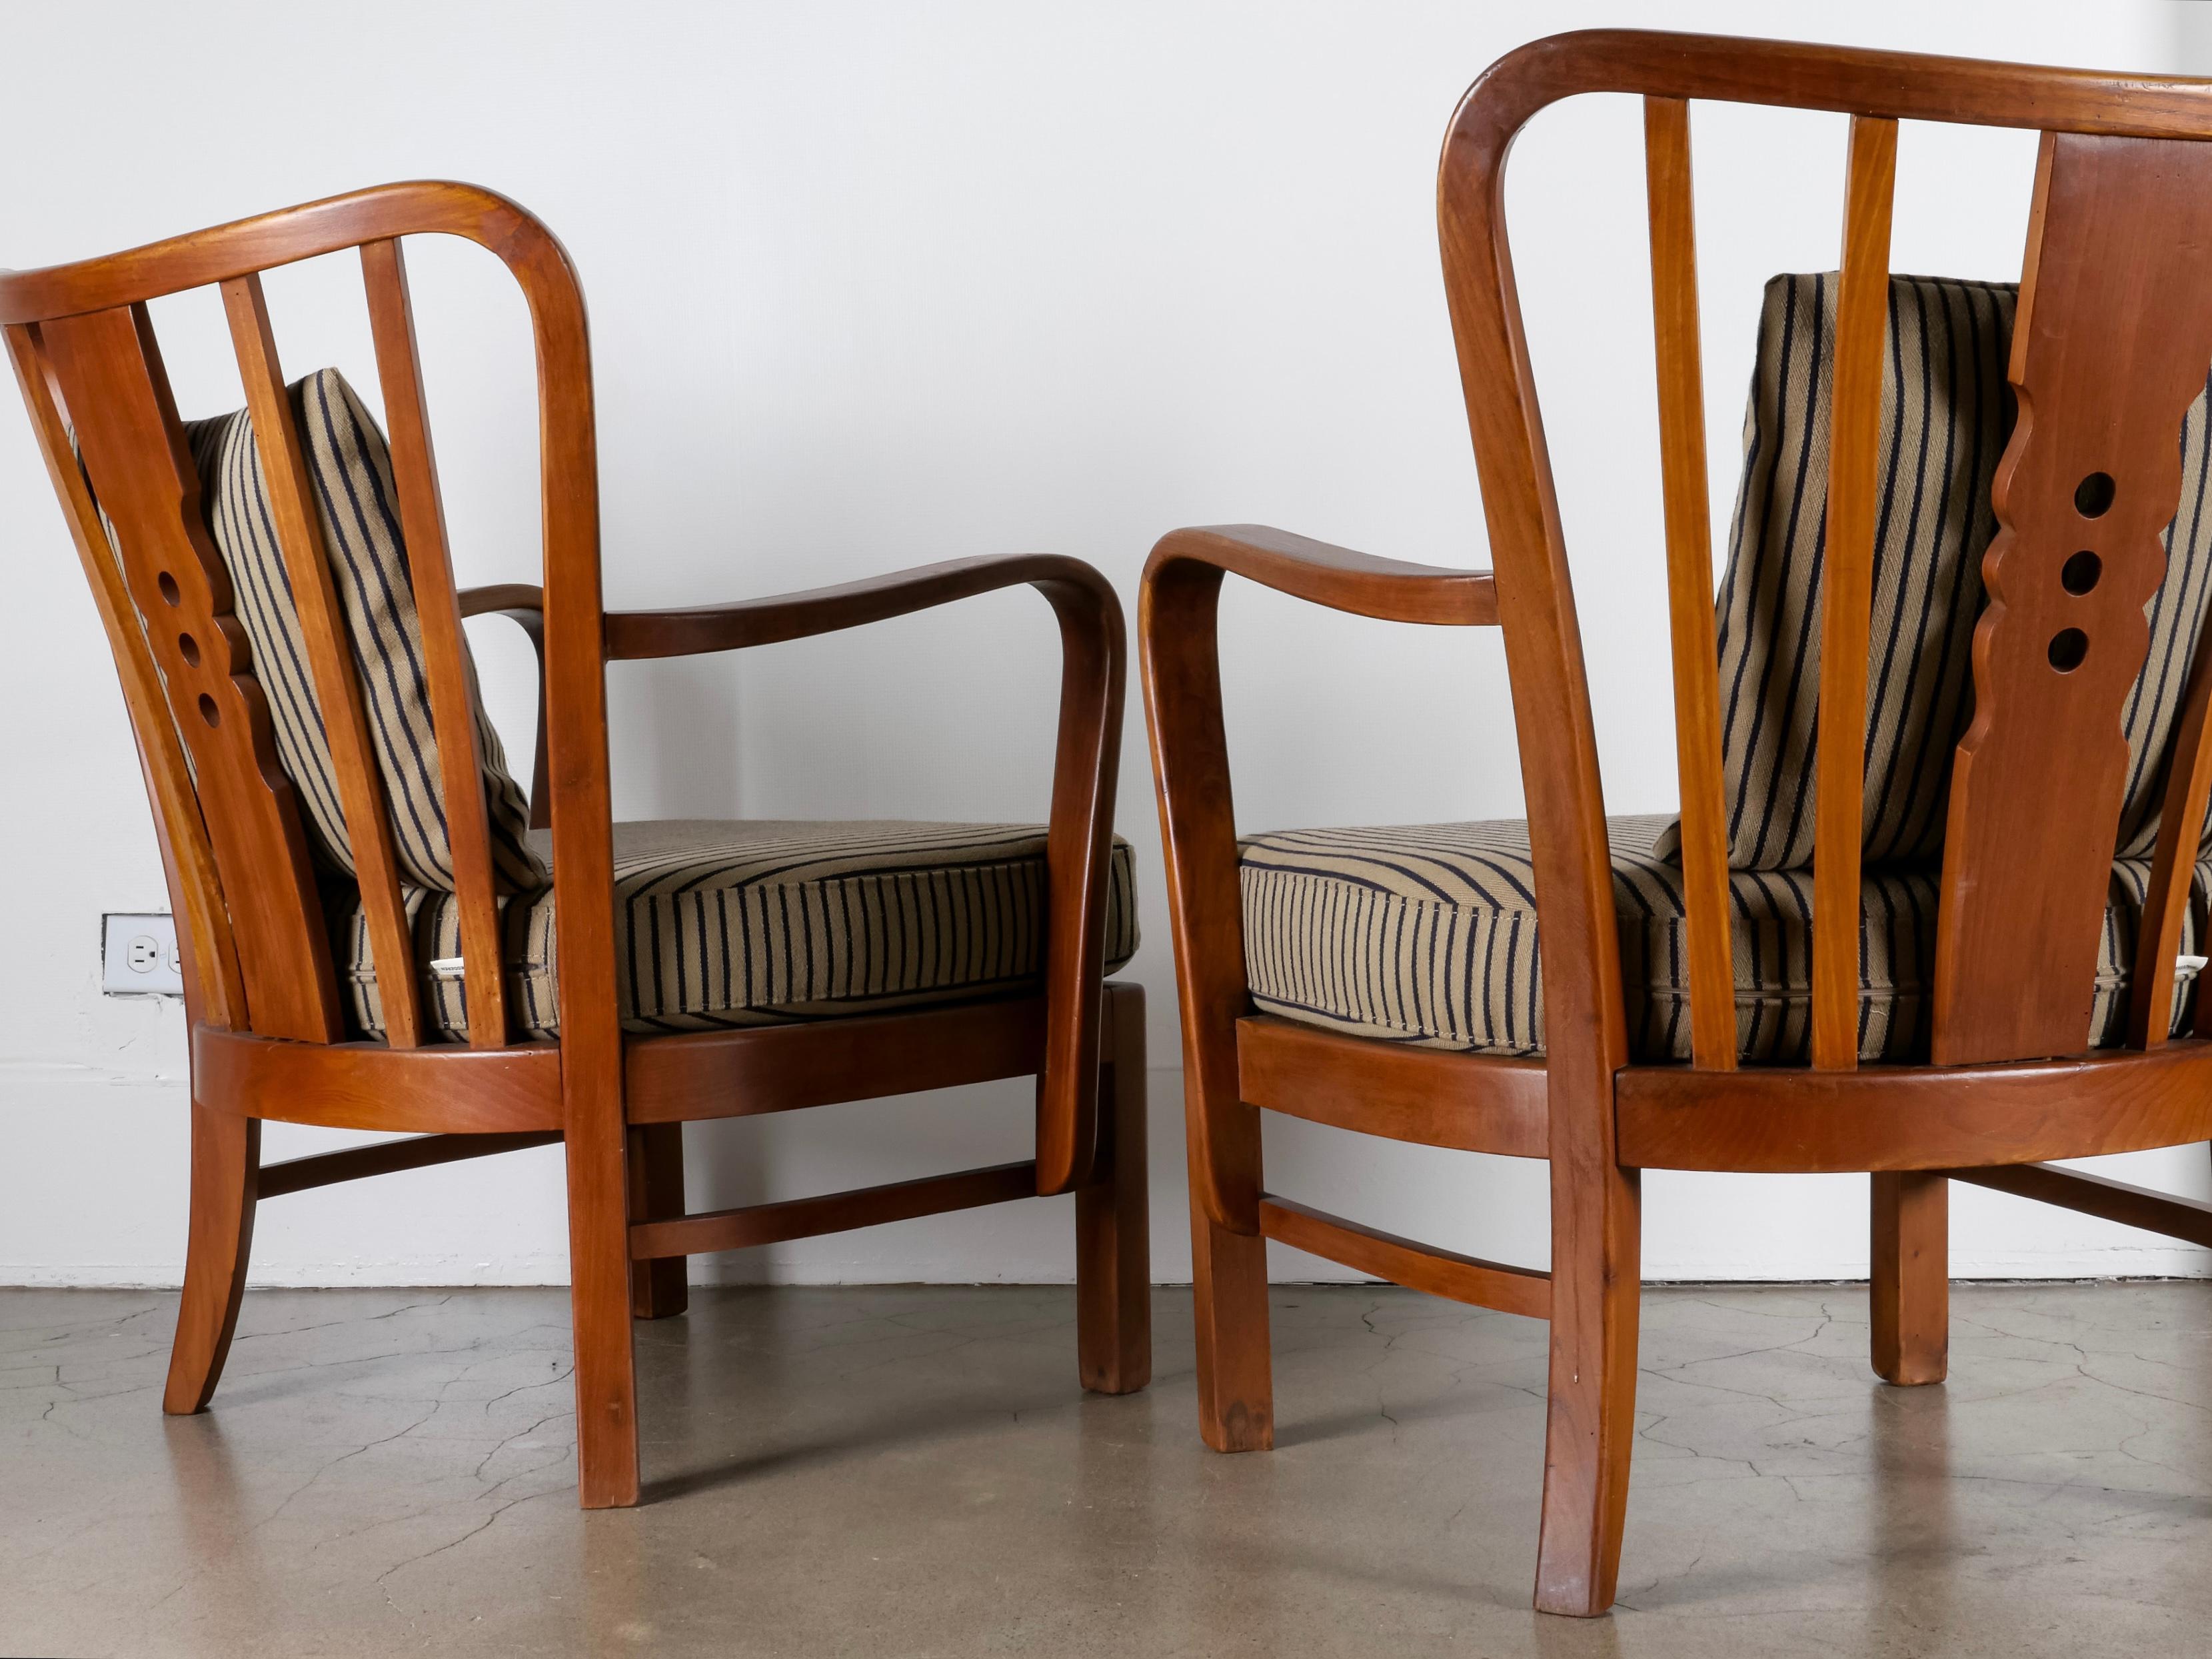 Wonderful pair of lounge chairs imported from Denmark. Model 1588, made by Fritz Hansen during the 1930s. Solid oak frames and freshly upholstered striped Danish wool cushions. Rare and in excellent vintage condition. Sold as pair. 